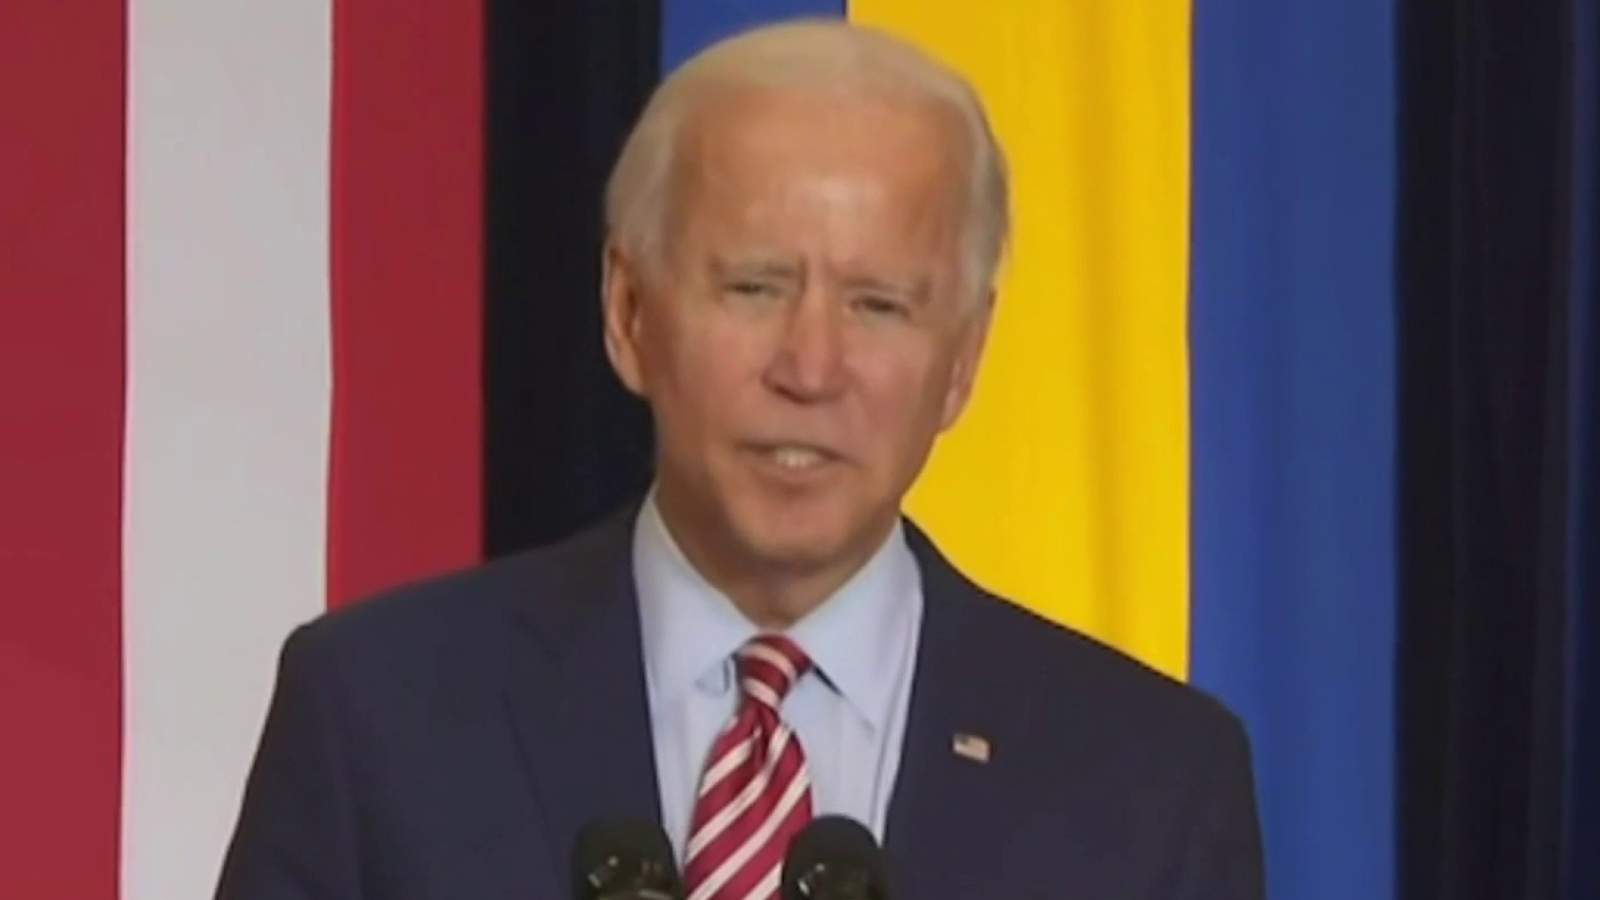 Former VP Joe Biden campaigns for Latino voters in Kissimmee